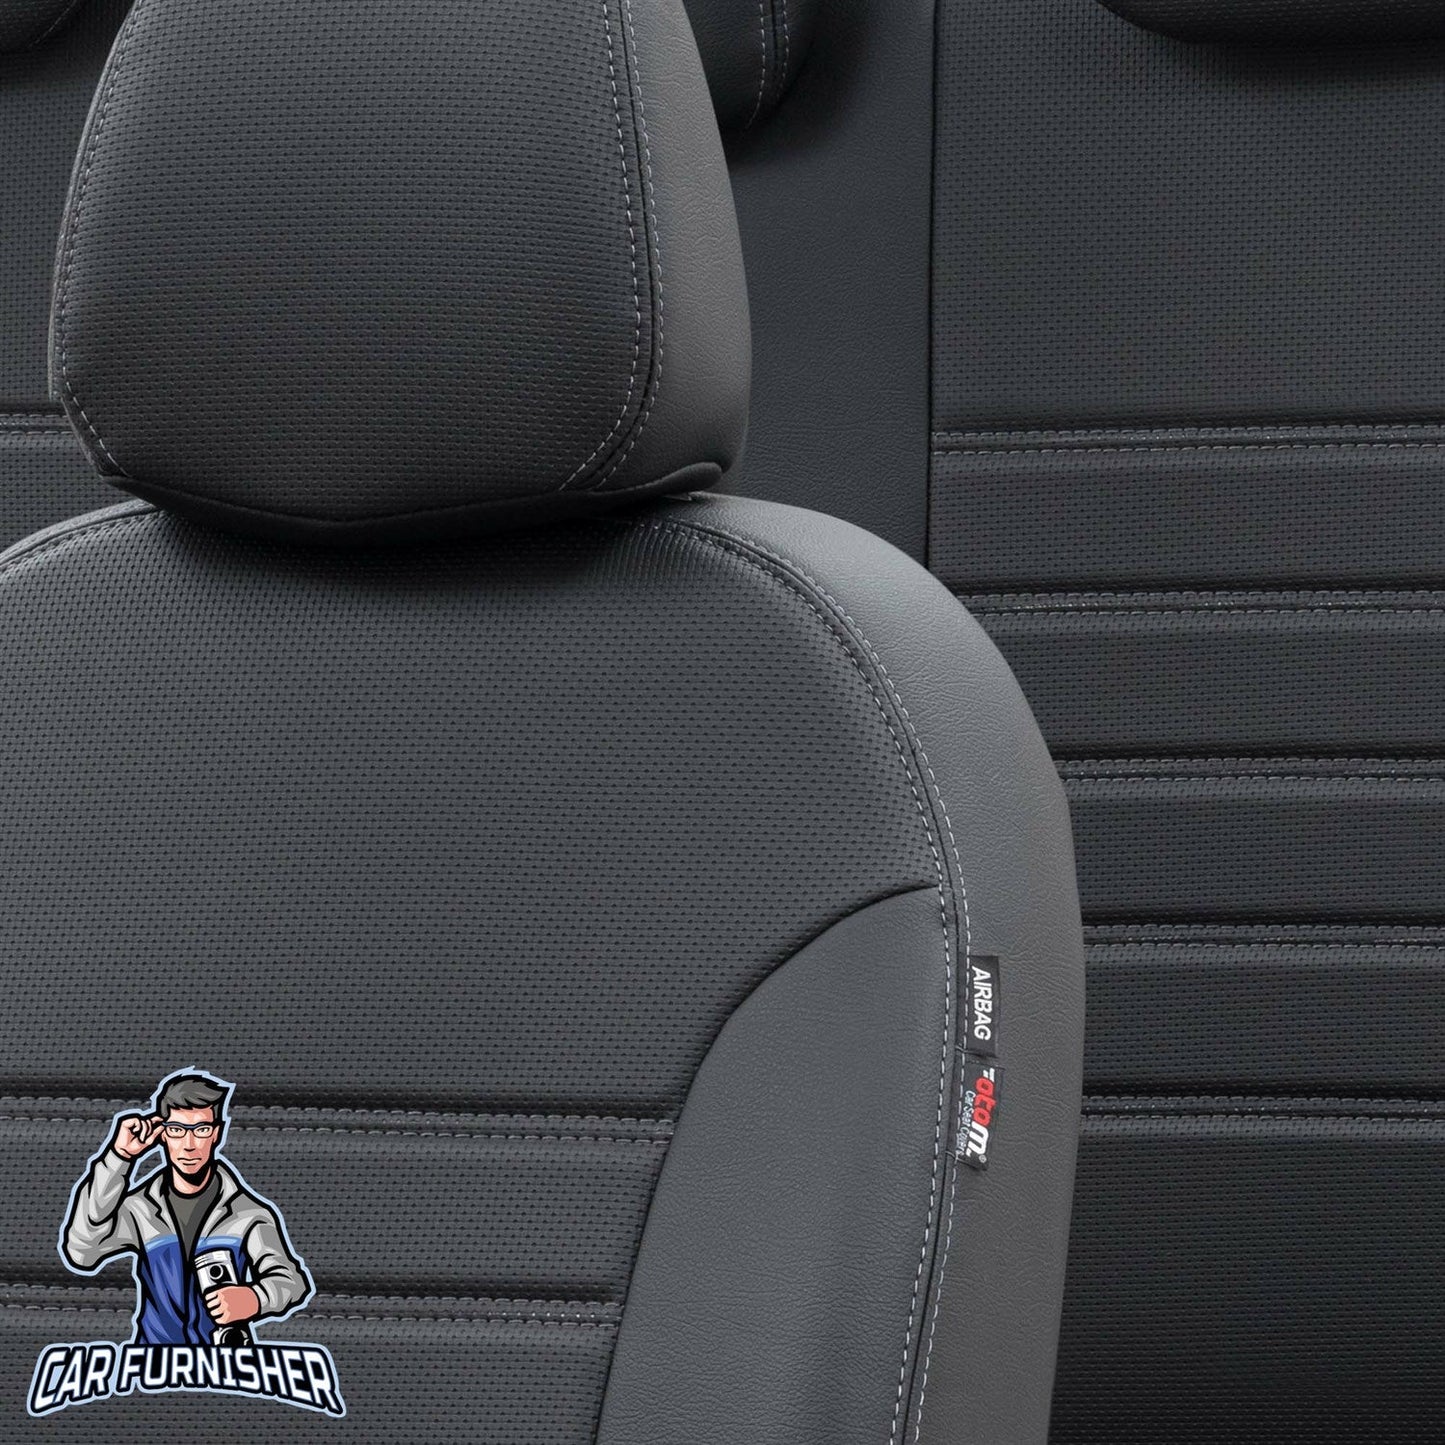 Fiat Scudo Seat Covers New York Leather Design Black Leather